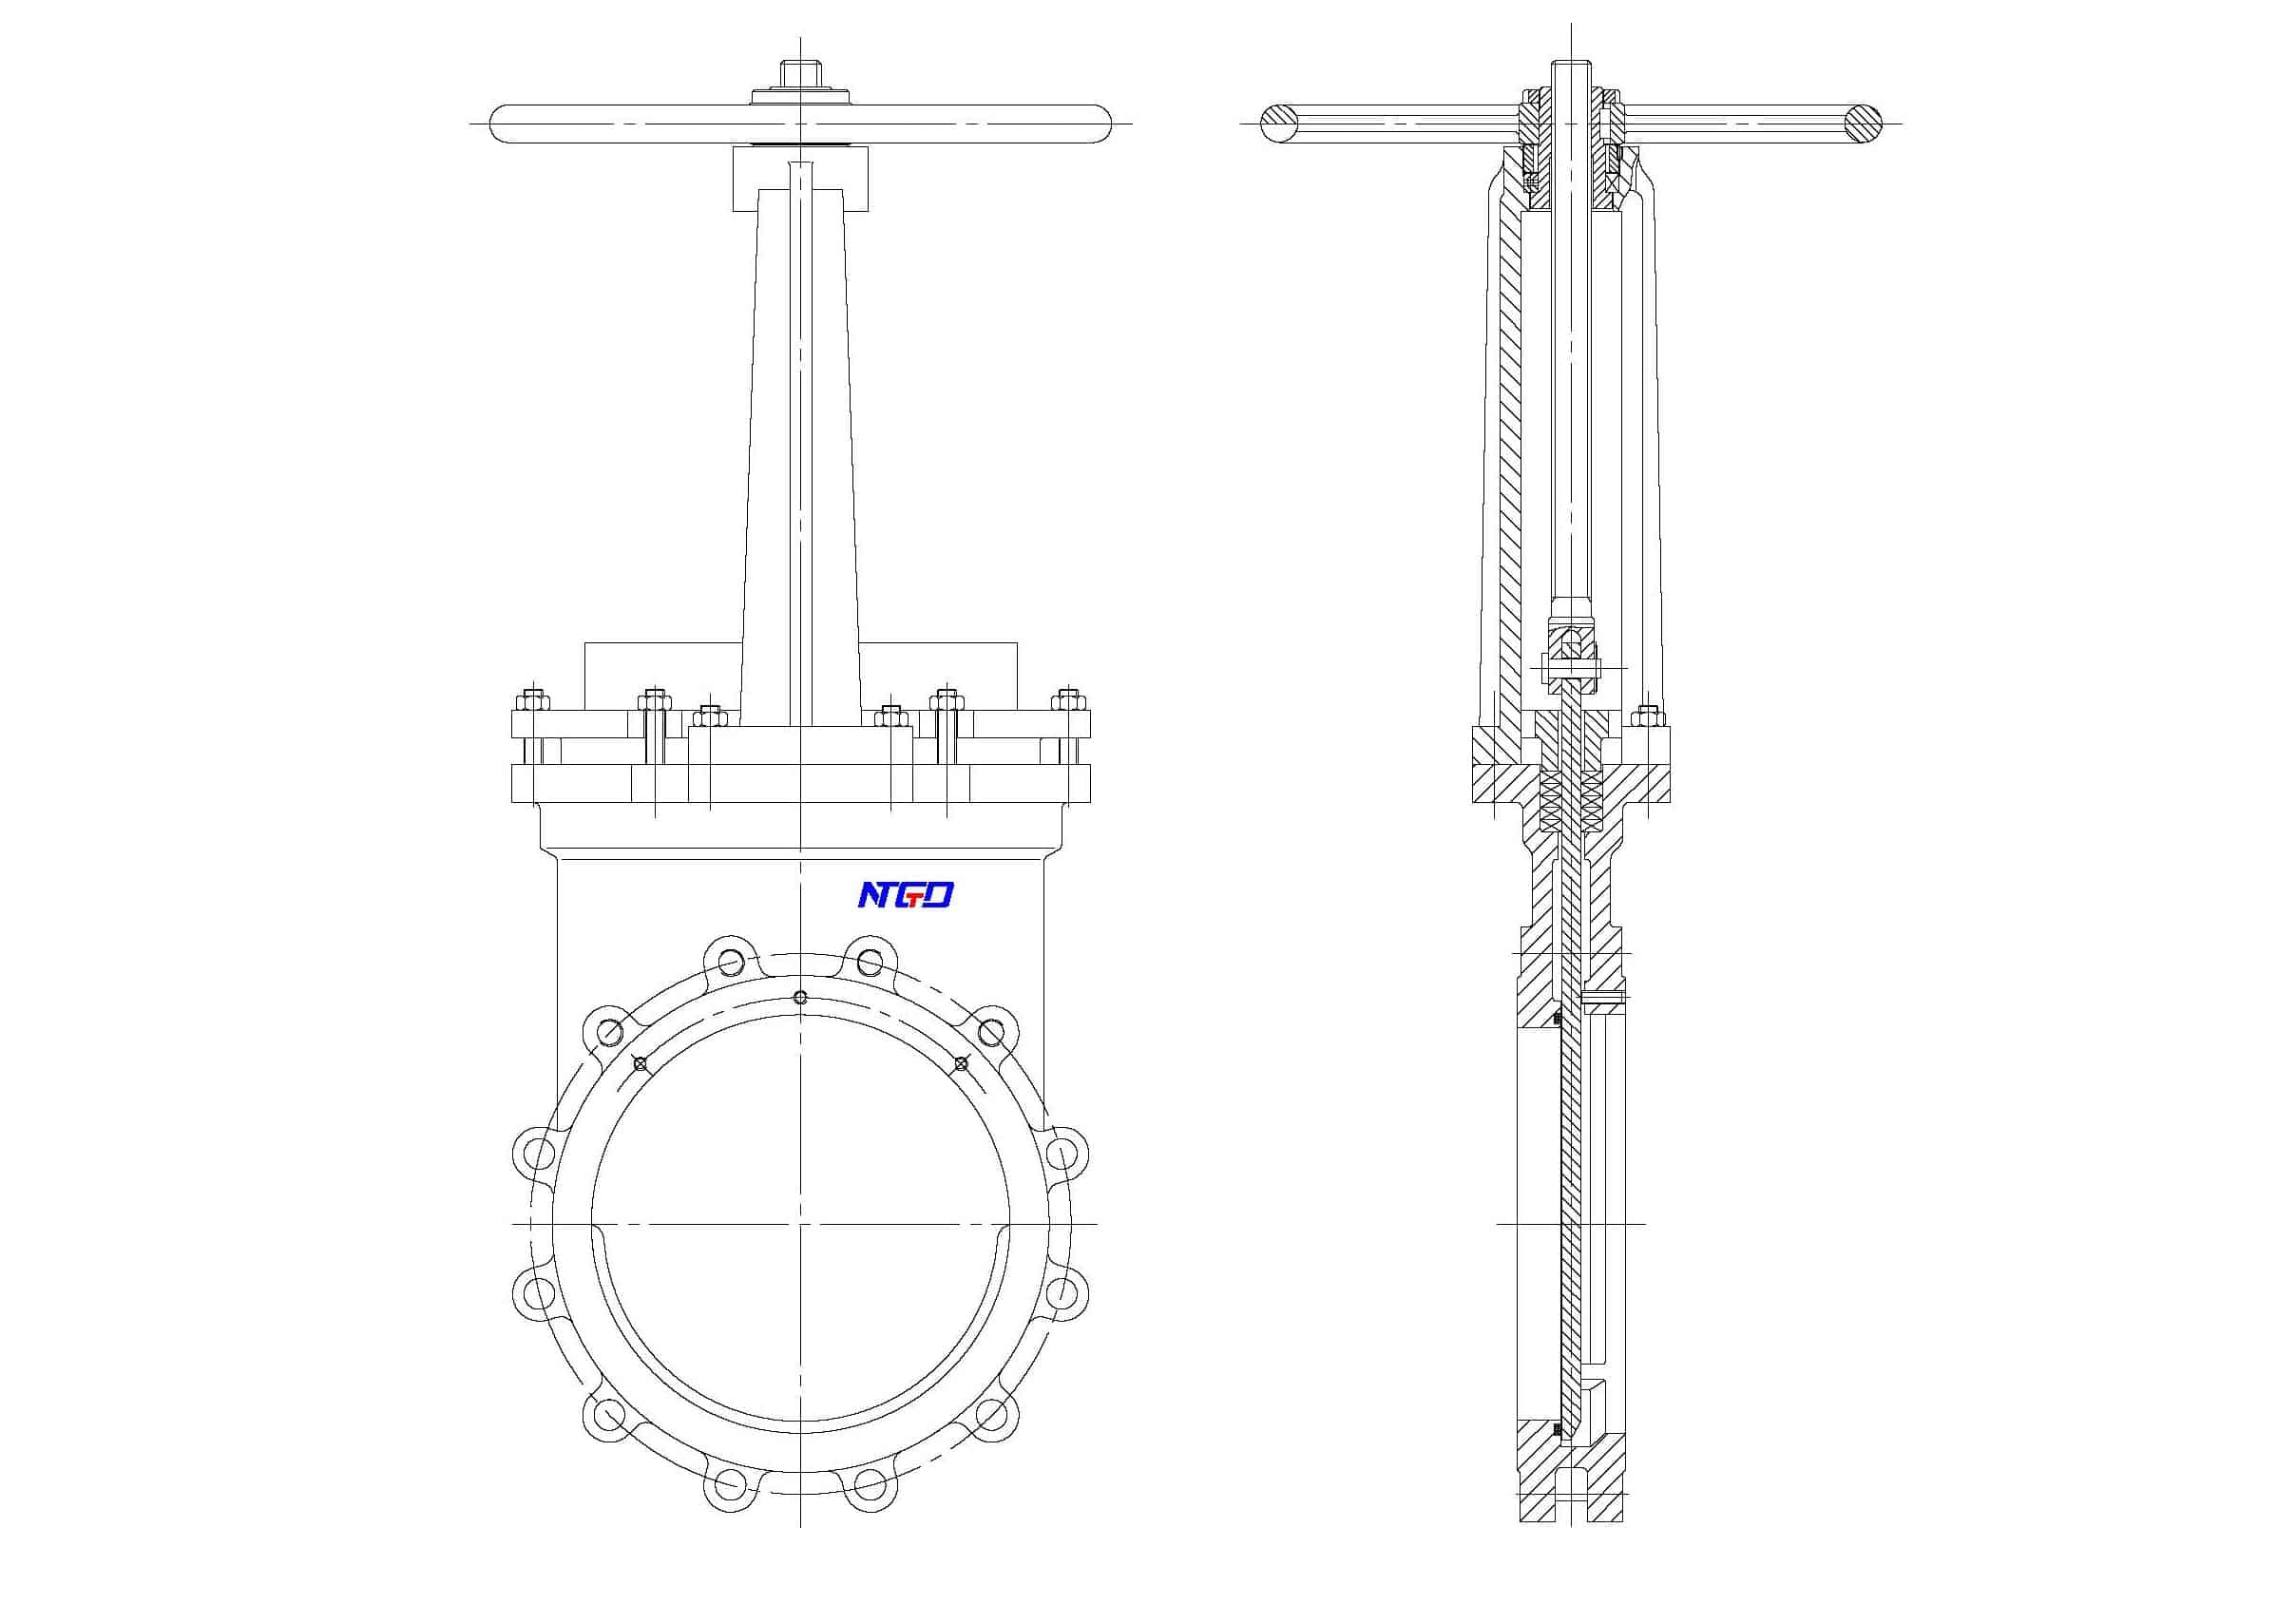 Everything You Need to Know about Knife Gate Valve - NTGD valve